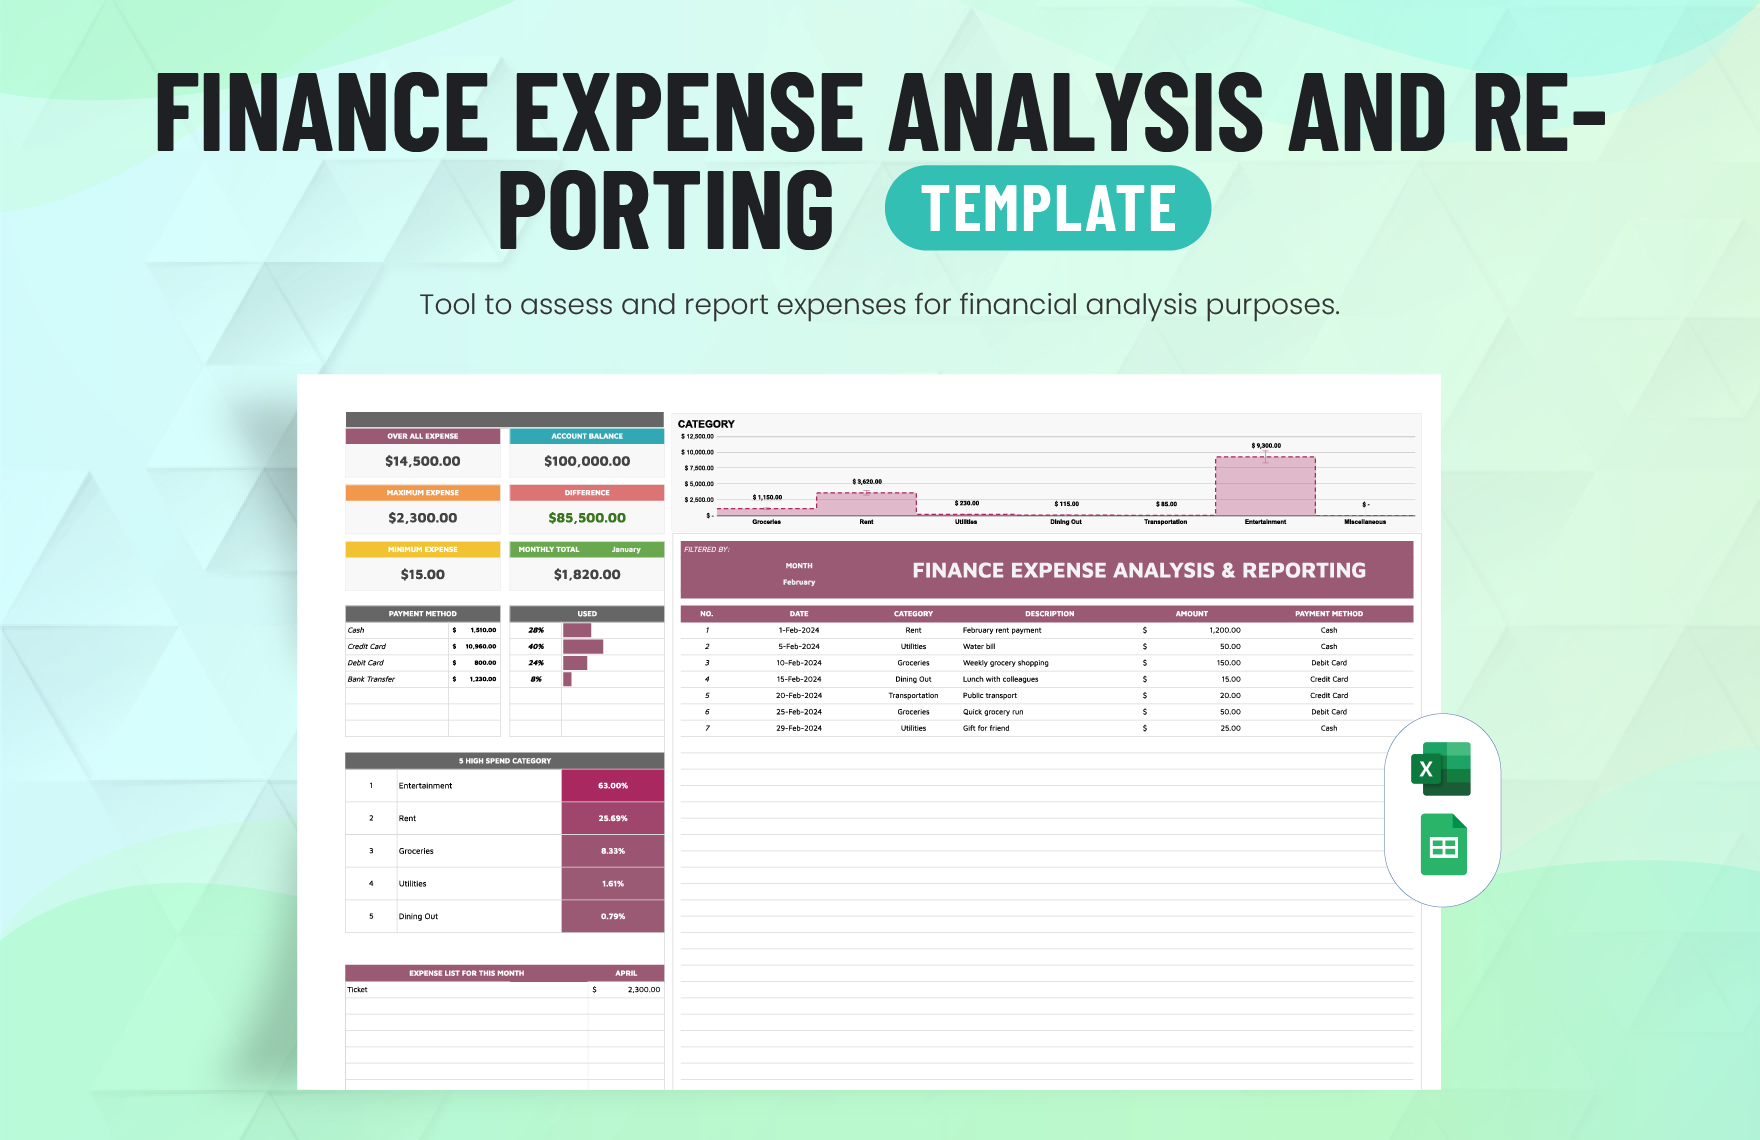 Finance Expense Analysis and Reporting Template